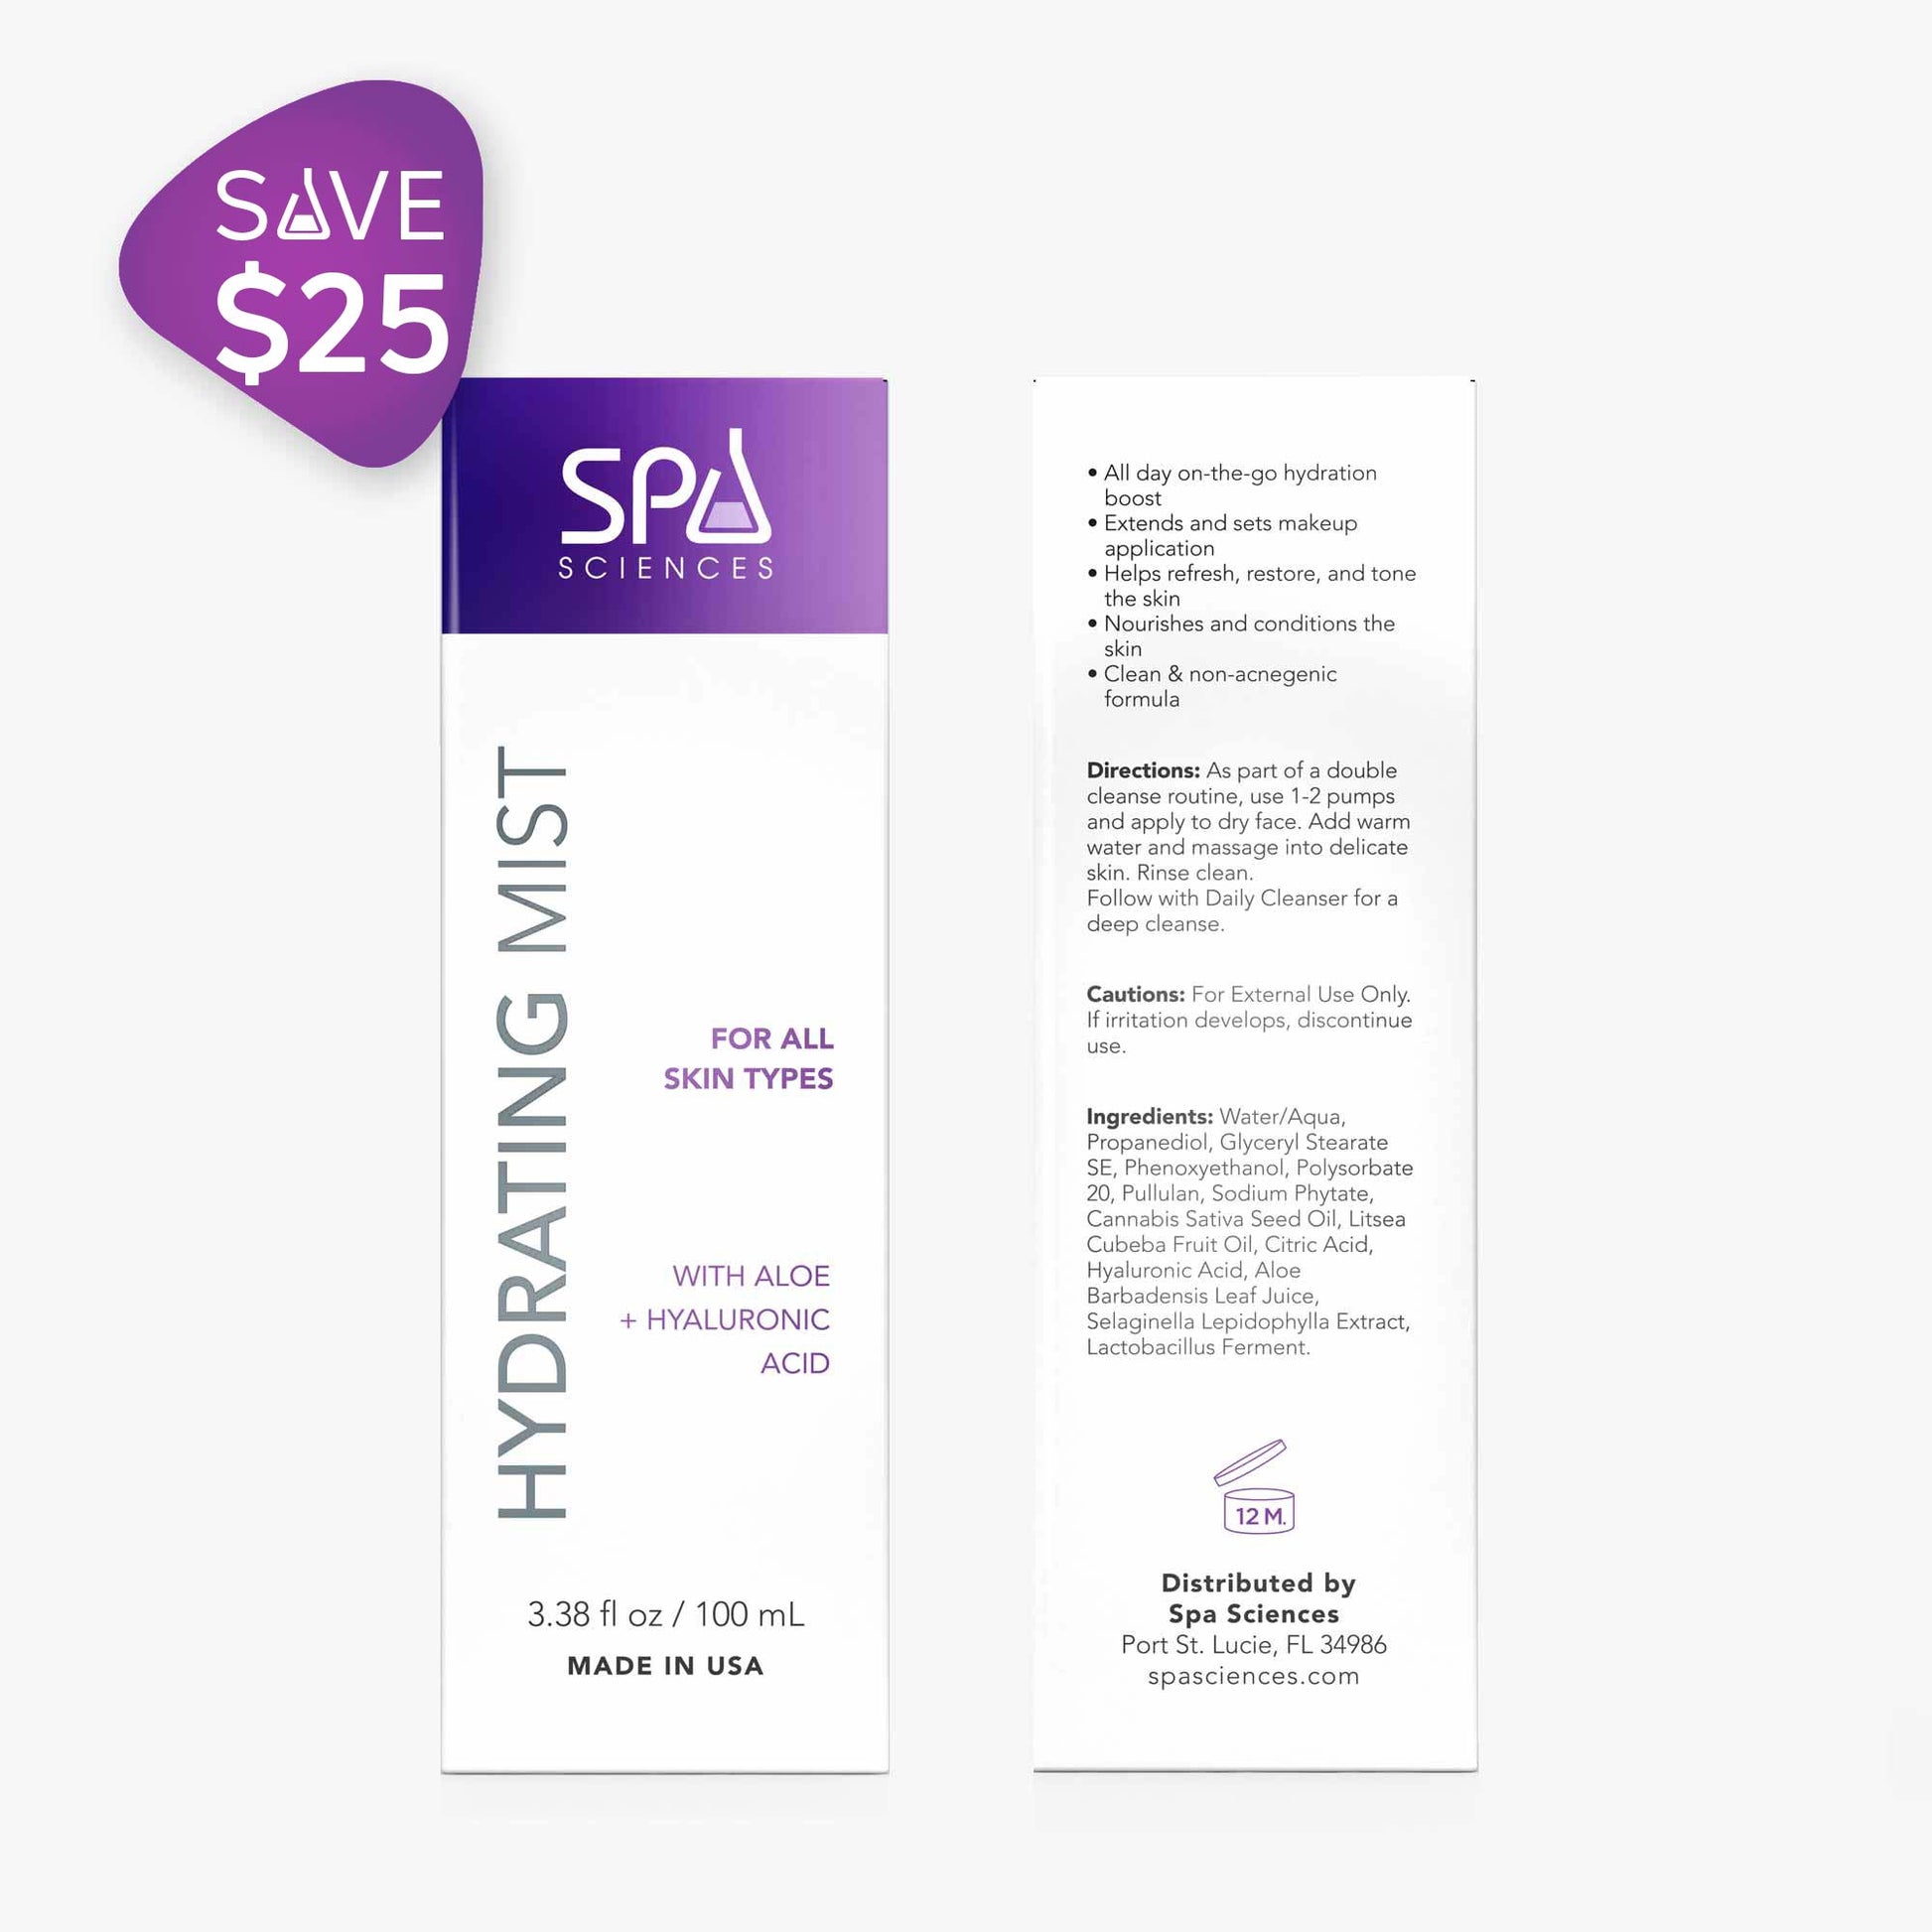 Plump It hydrating mist by Spa Sciences.